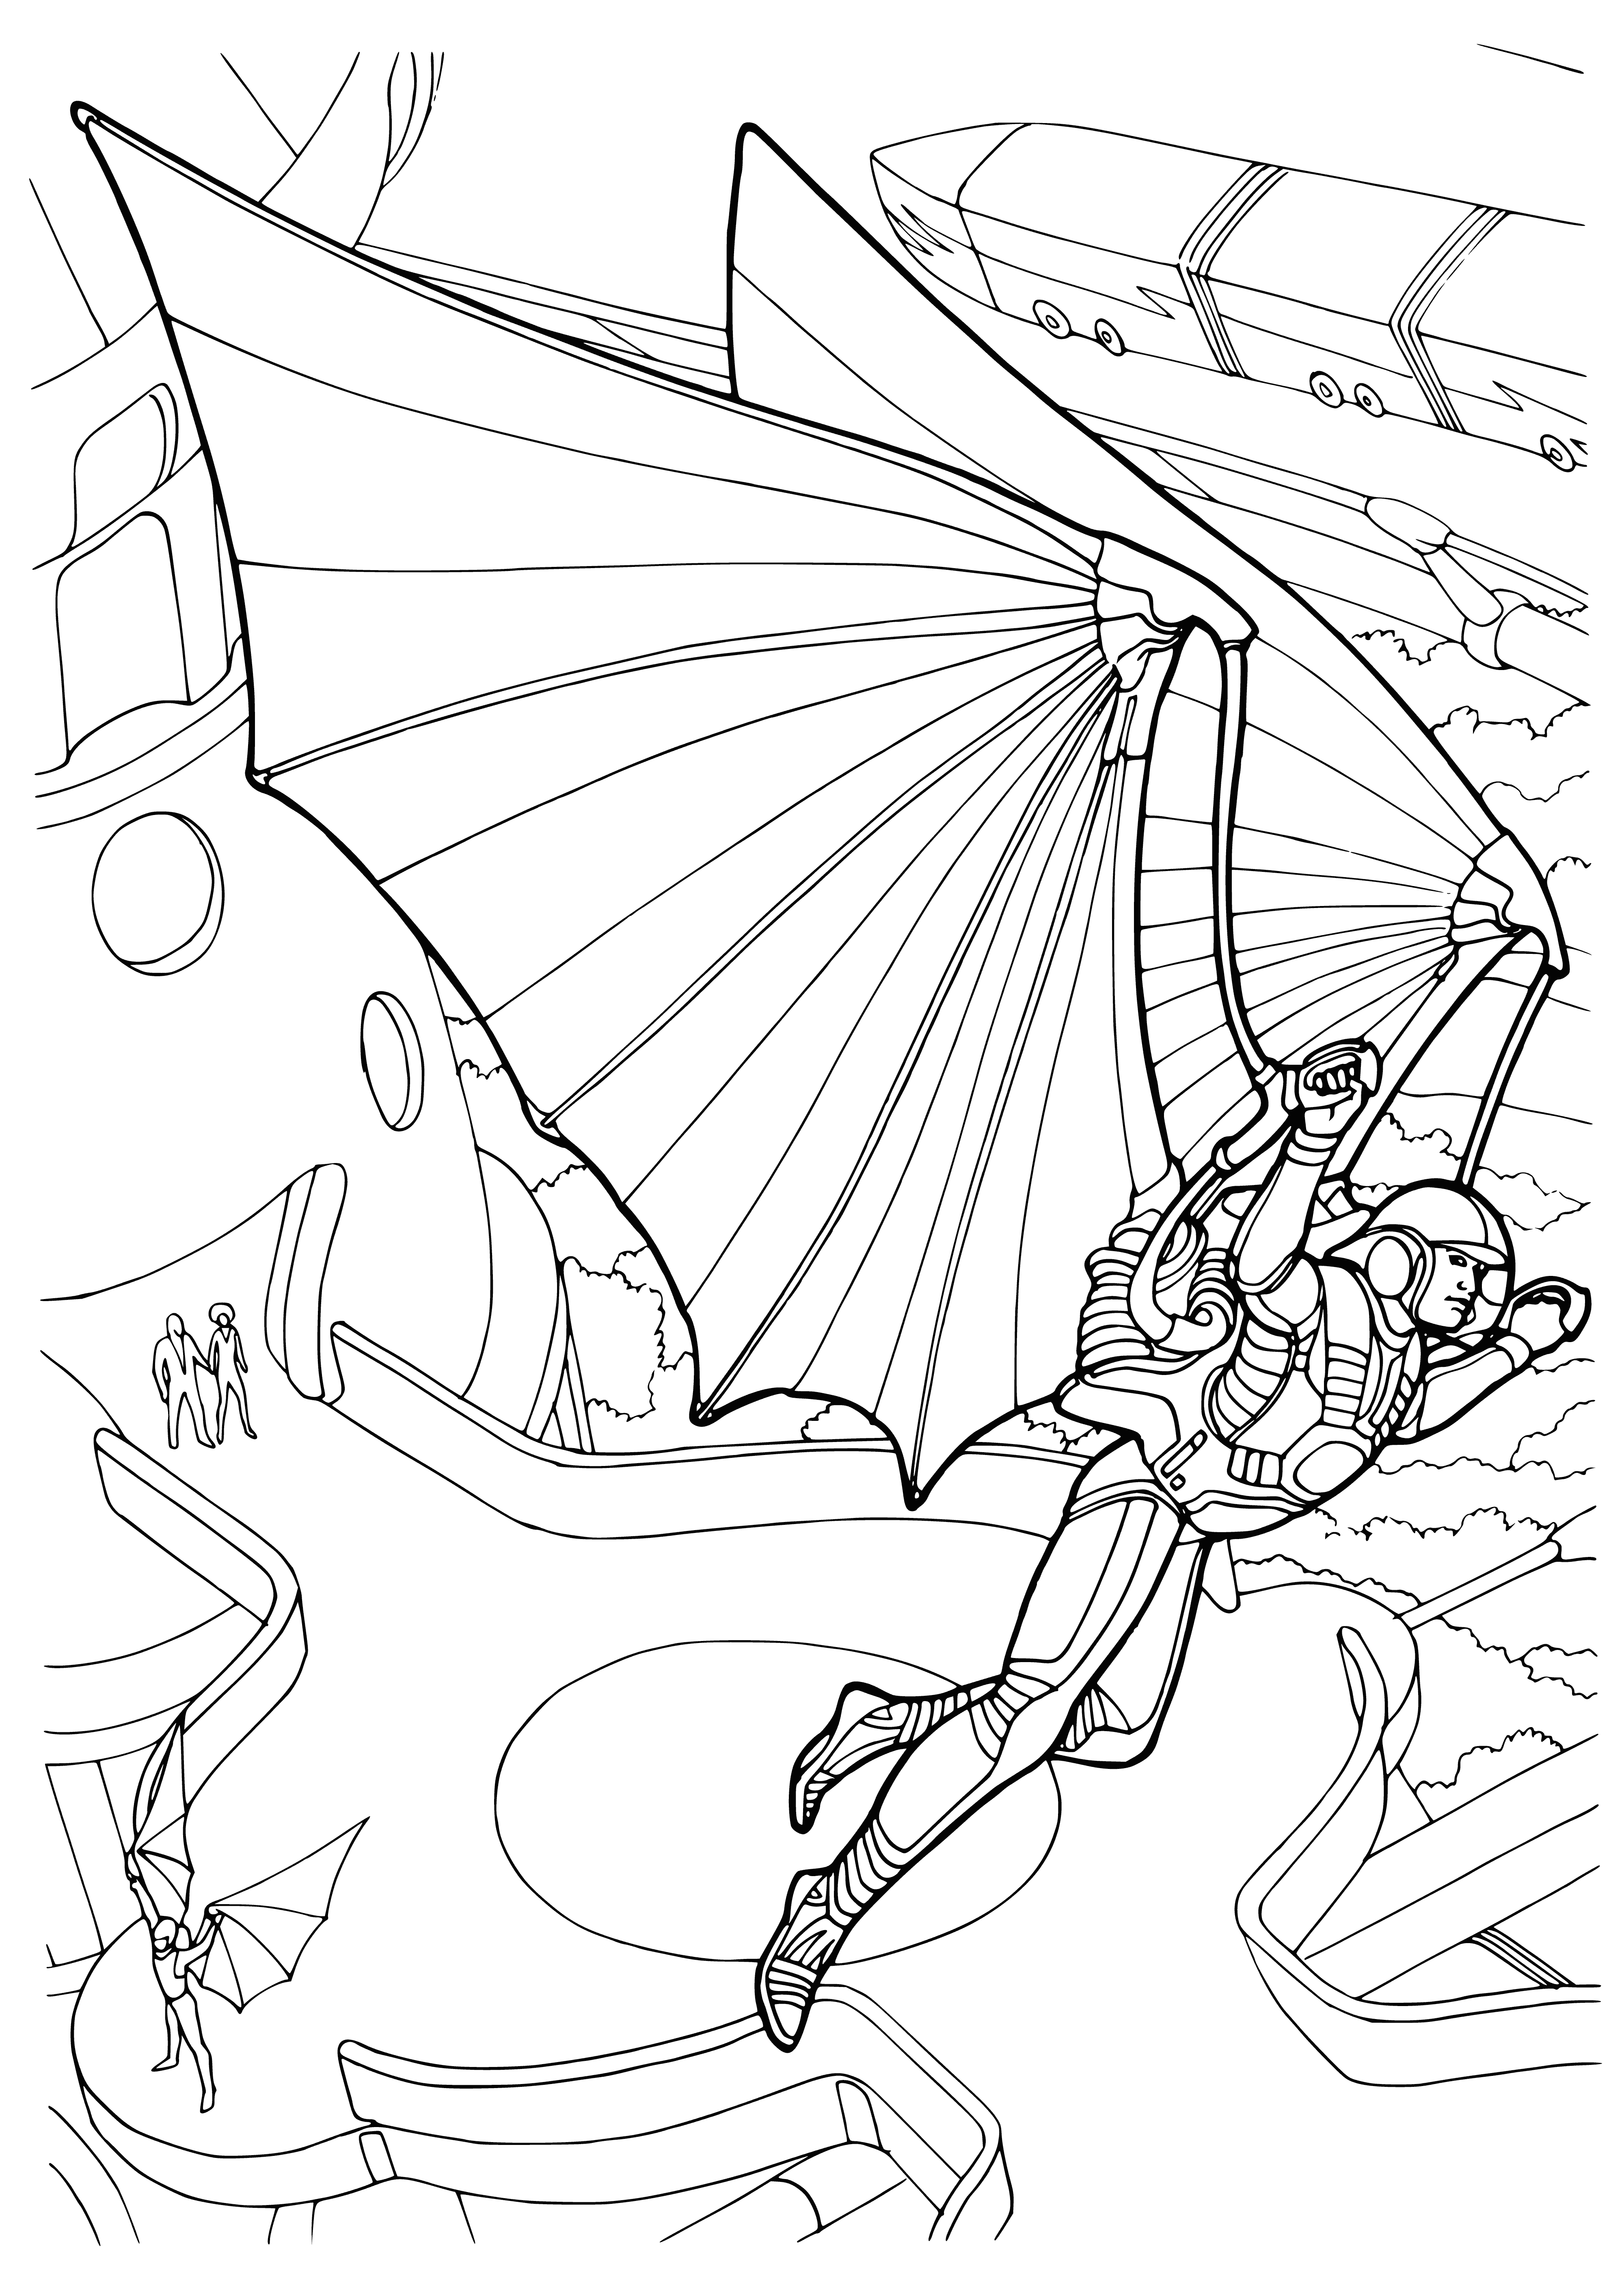 coloring page: Future: The Bat, a speedy & eco-friendly vehicle that can fly in urban & rural areas. Quickly & easily transports people & cargo. #sustainable #innovation